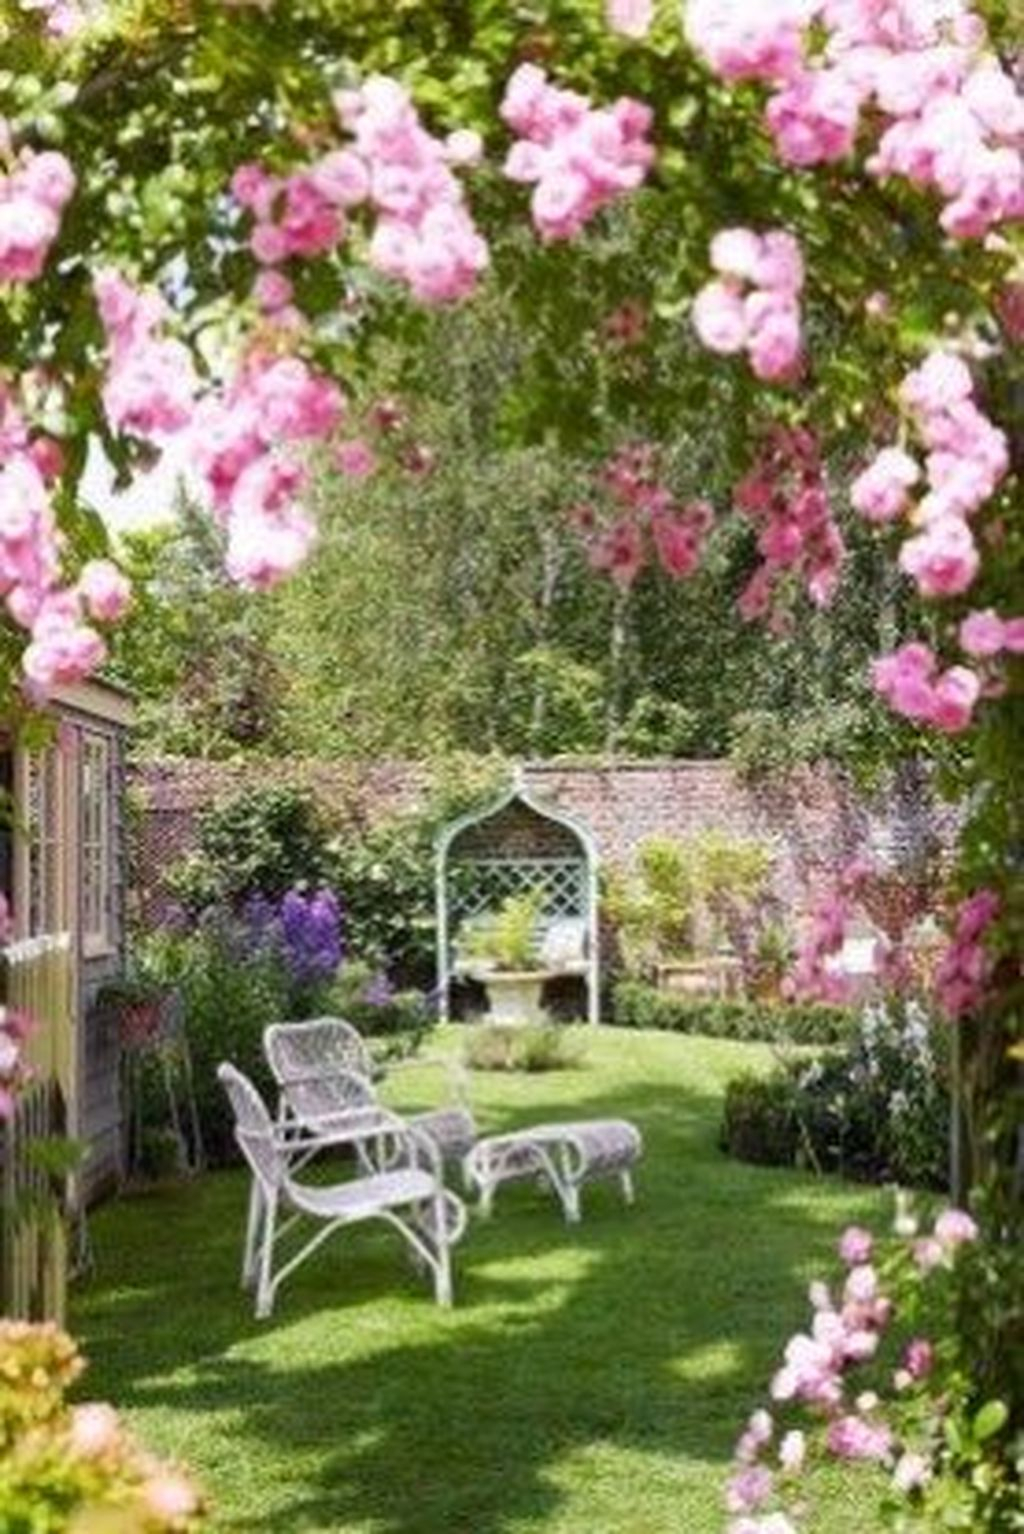 Amazing Garden Design Ideas For Small Space To Try 13